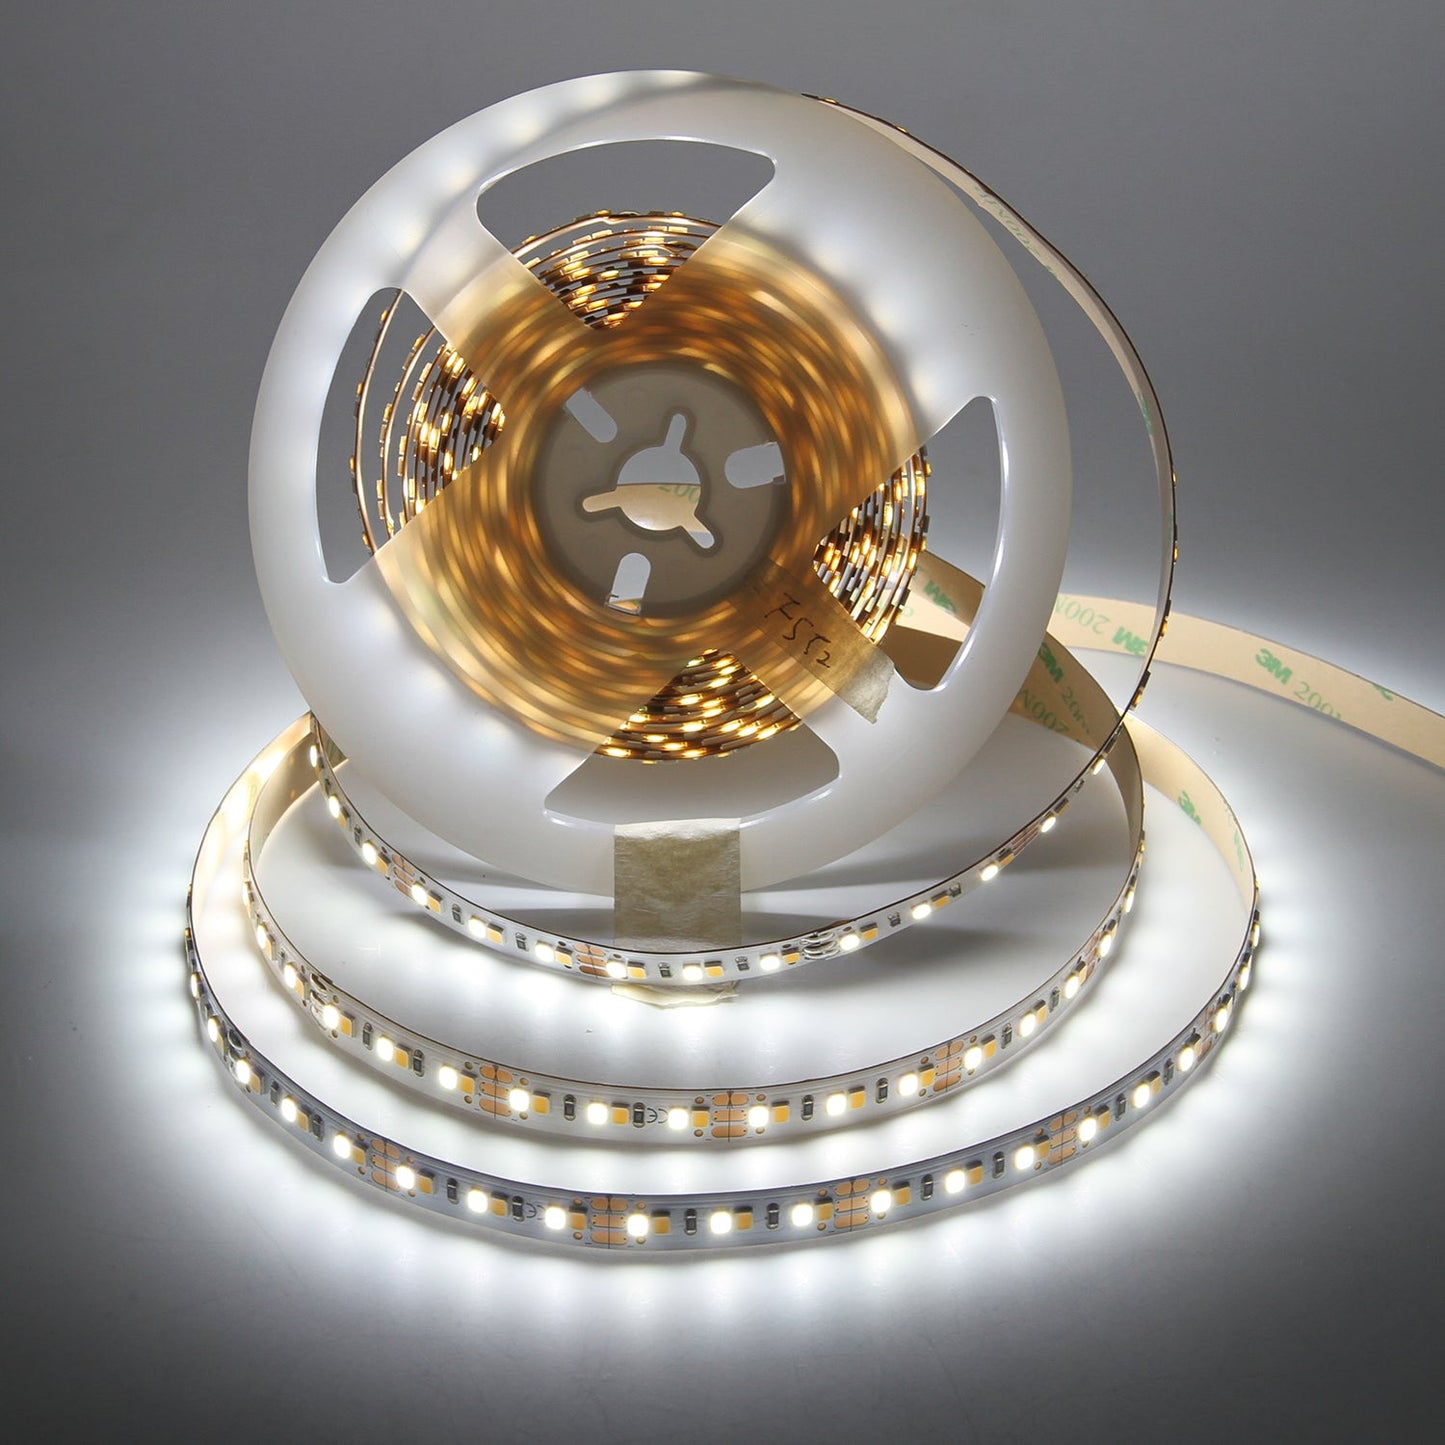 Send an inquiry for 12V Flexible Cabinet Tape Lighting Width 10mm Multi Color LED Ribbon Light with CE for House Decor 5M/Roll to high quality Cabinet Tape Lighting supplier. Wholesale LED Ribbon Light directly from China Cabinet Tape Lighting manufacturers/exporters. Get a factory sale price list and become a distributor/agent-vstled.com